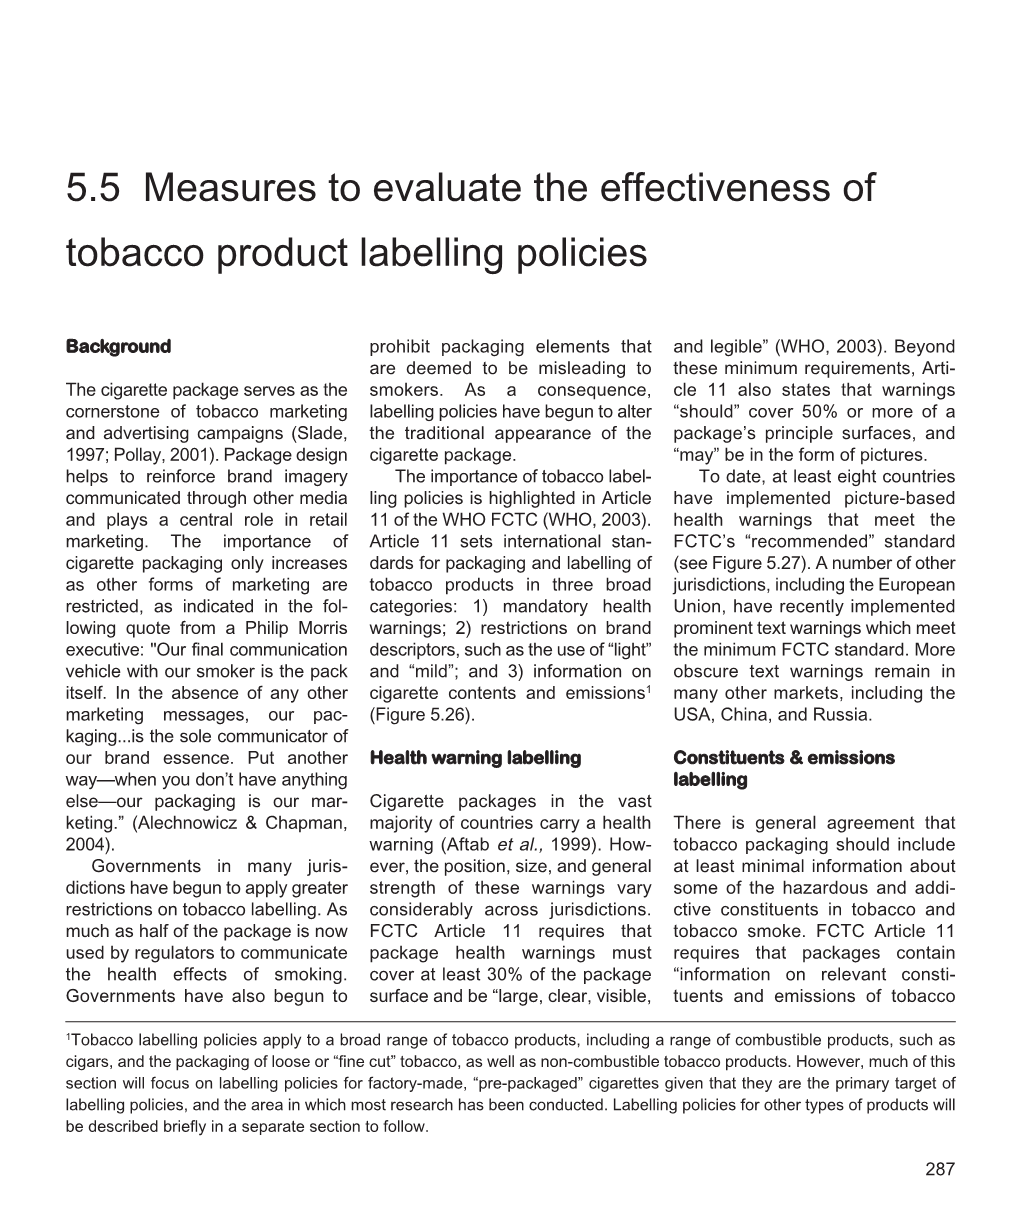 5.5 Measures to Evaluate the Effectiveness of Tobacco Product Labelling Policies